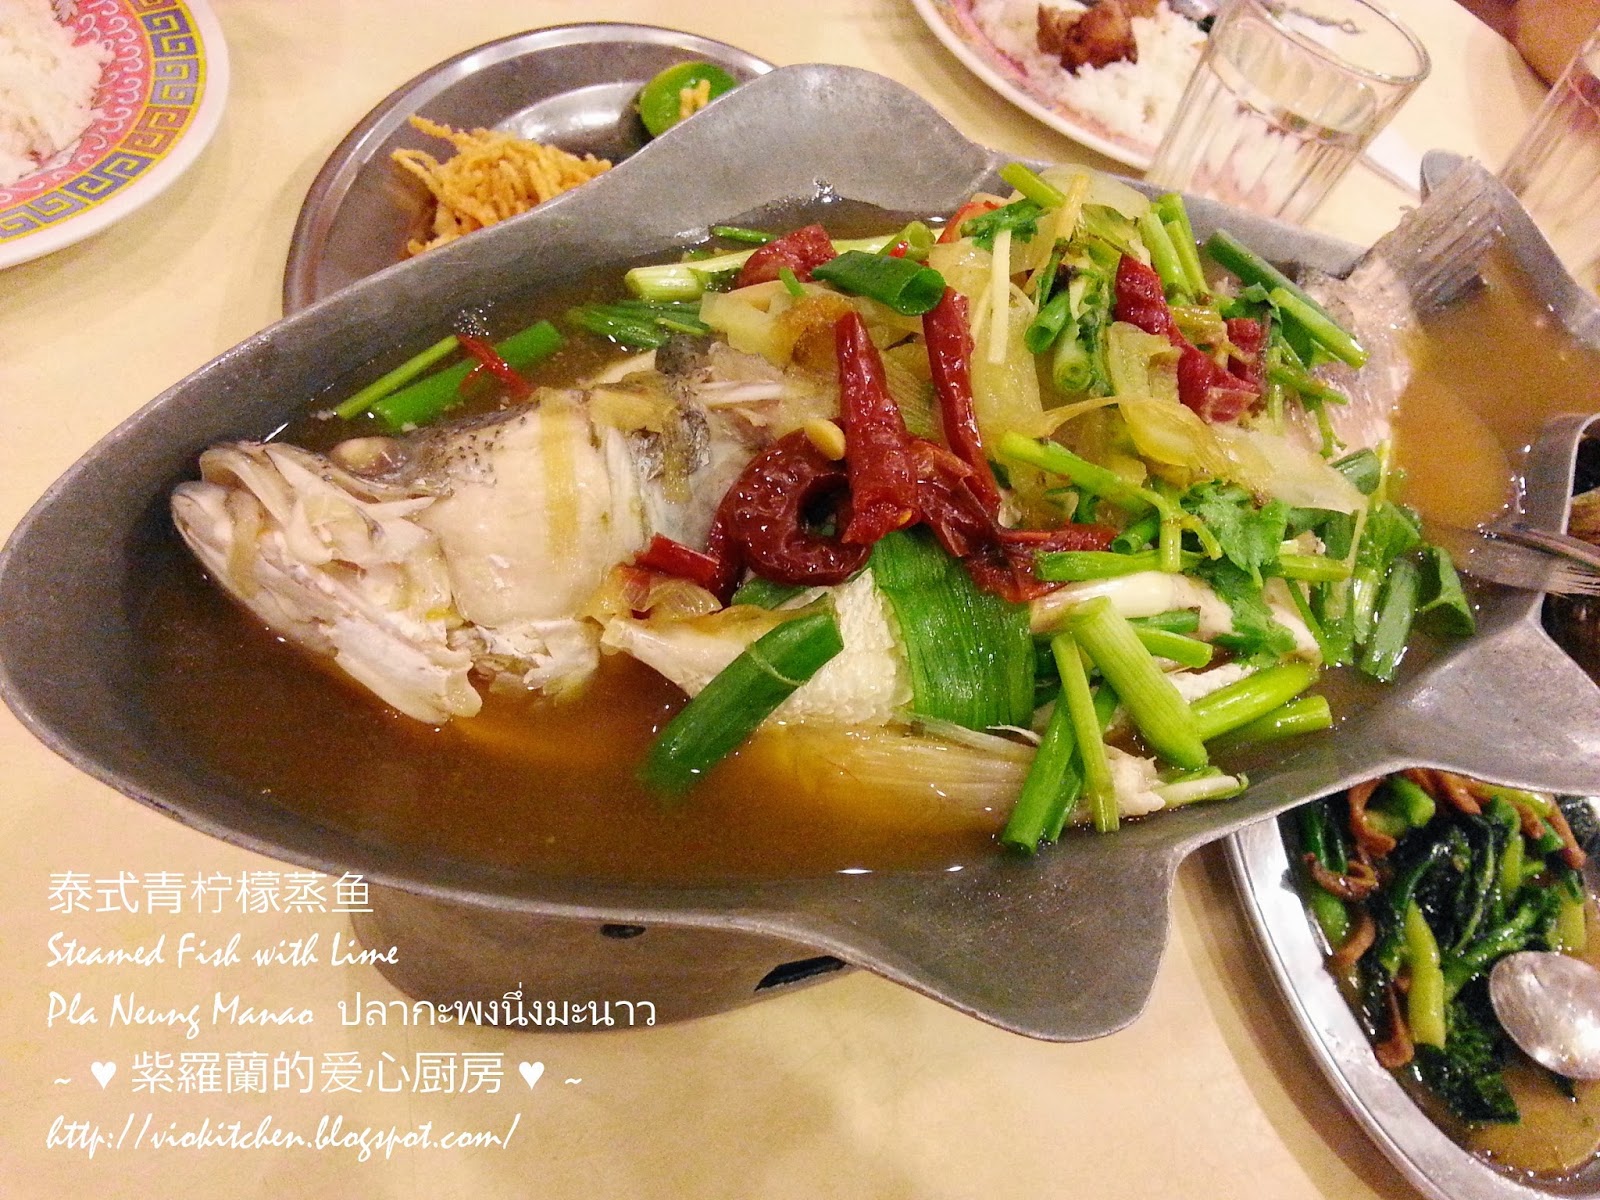 Violet's Kitchen ~♥紫羅蘭的爱心厨房♥~ : 泰式青柠檬蒸鱼 Steamed Fish with Lime / Pla ...